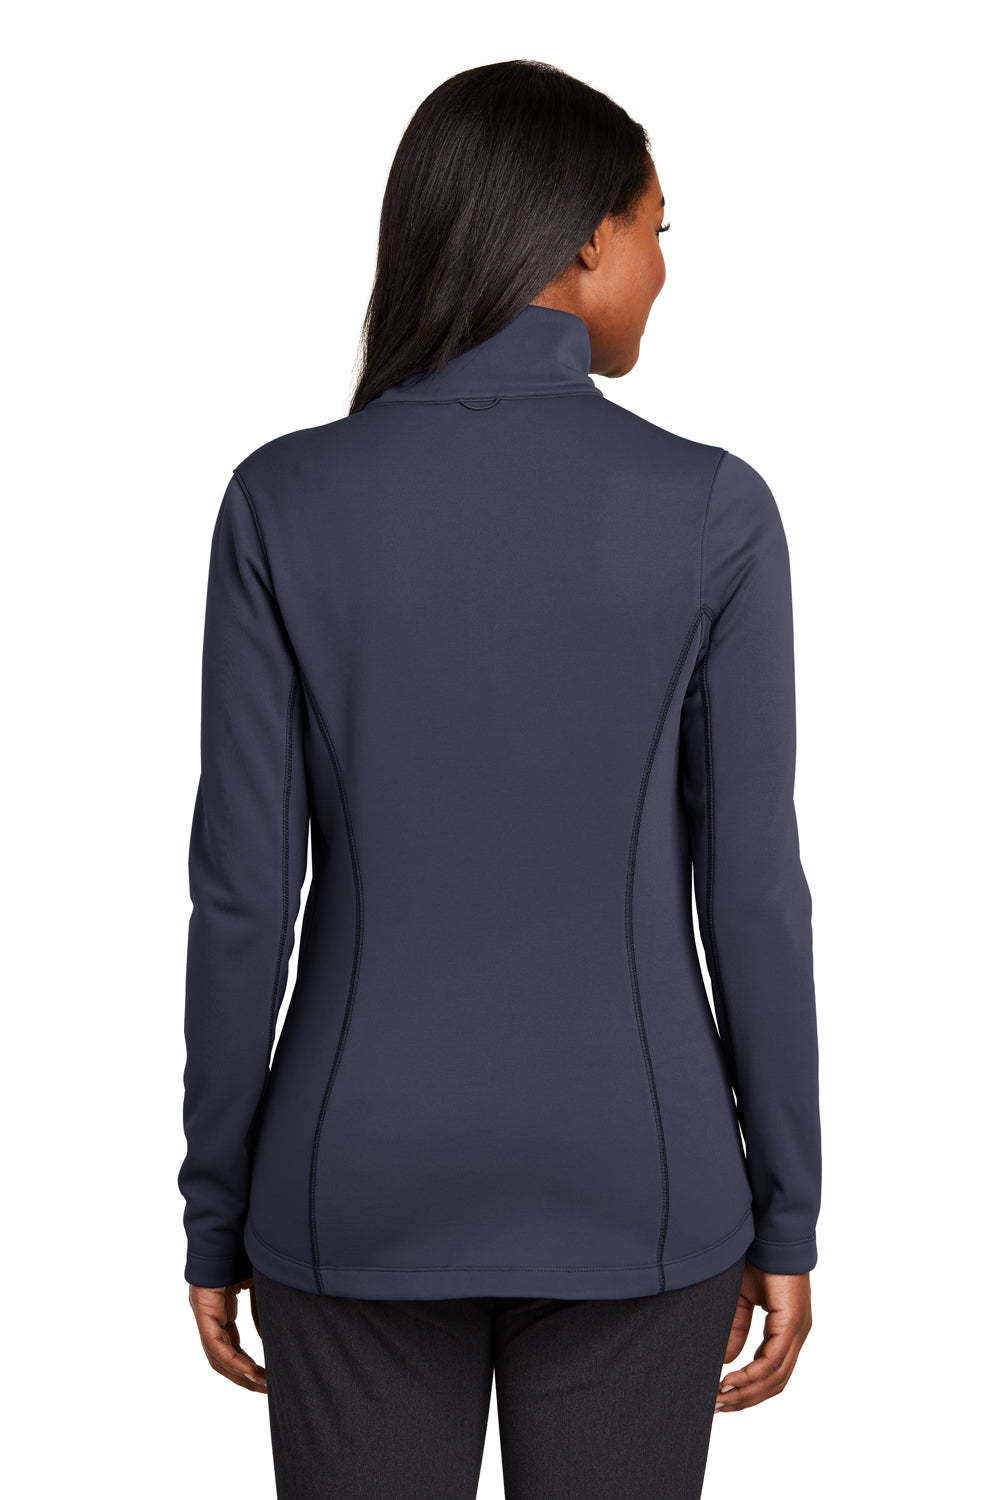 Port Authority L904 Womens Collective Full Zip Smooth Fleece Jacket River Blue Back